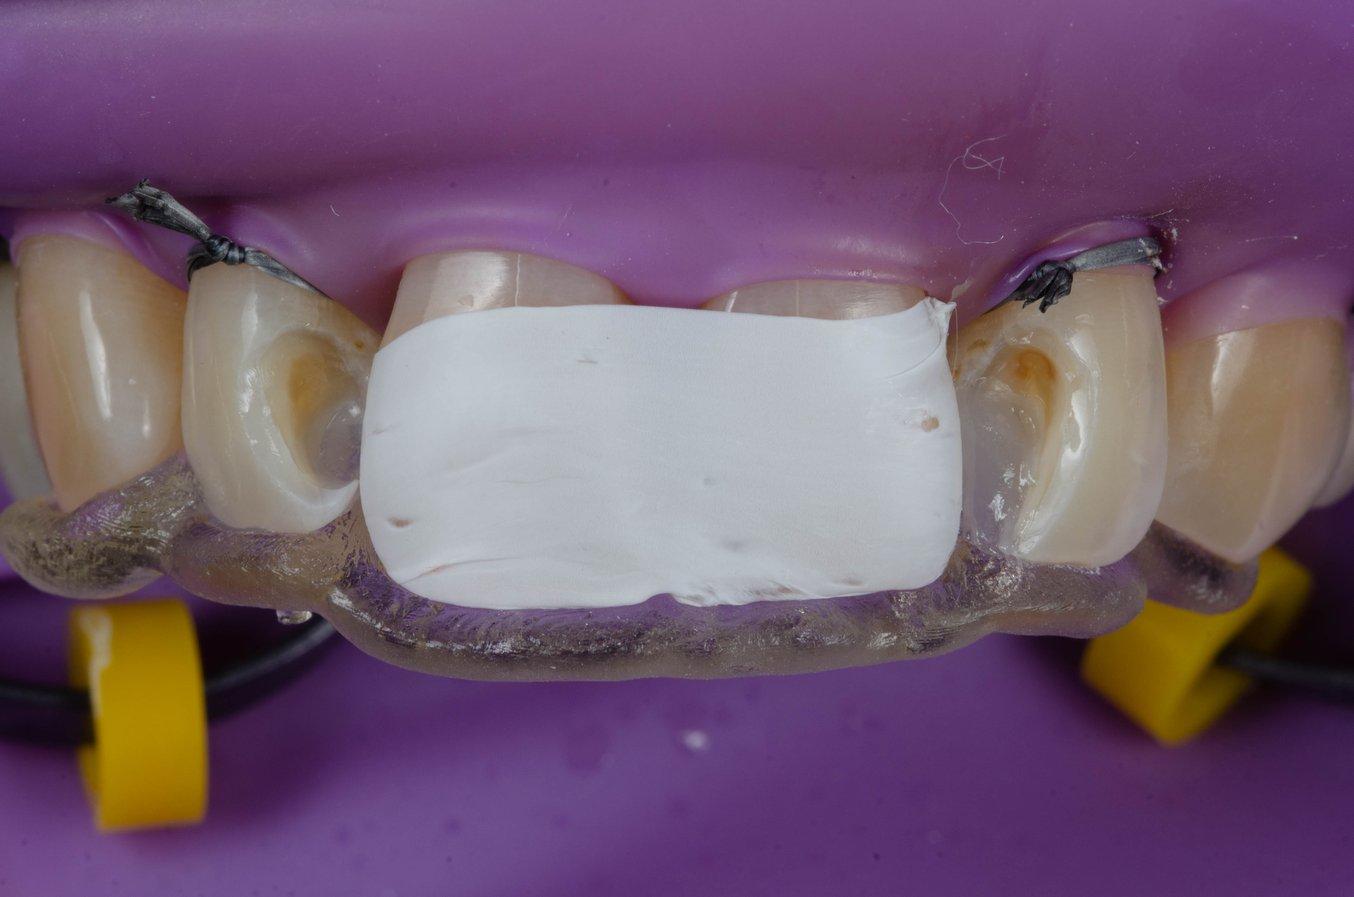 Printed palatal index used for Class III restorations of lateral incisors.